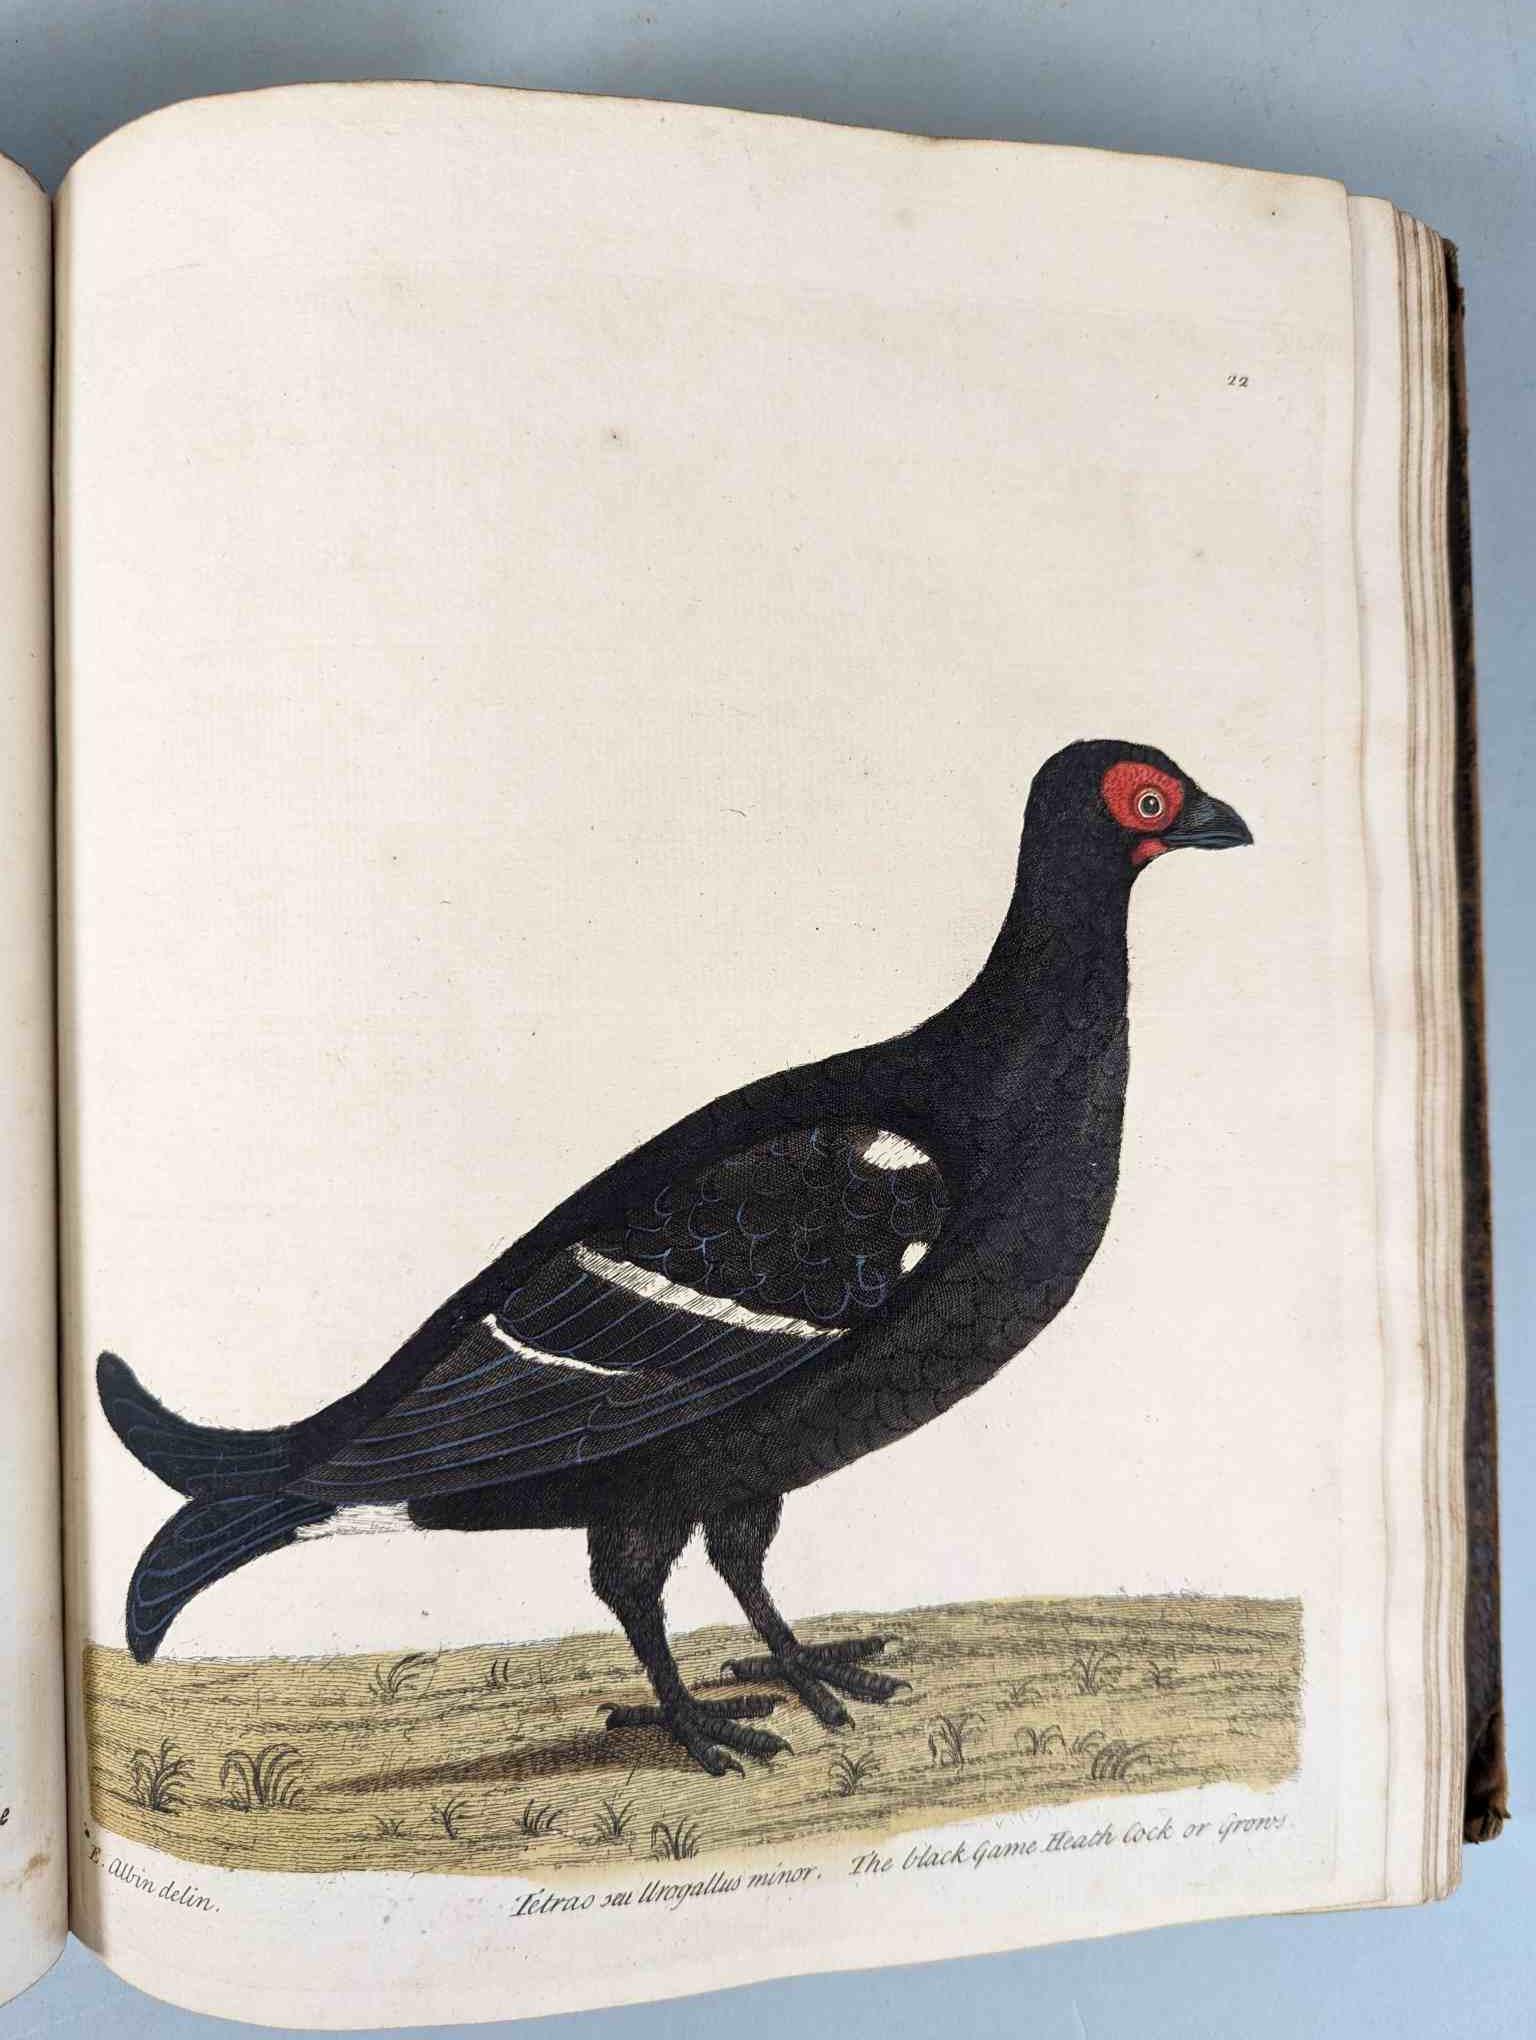 ALBIN, Eleazar. A Natural History of Birds, to which are added, Notes and Observations by W. - Image 25 of 208